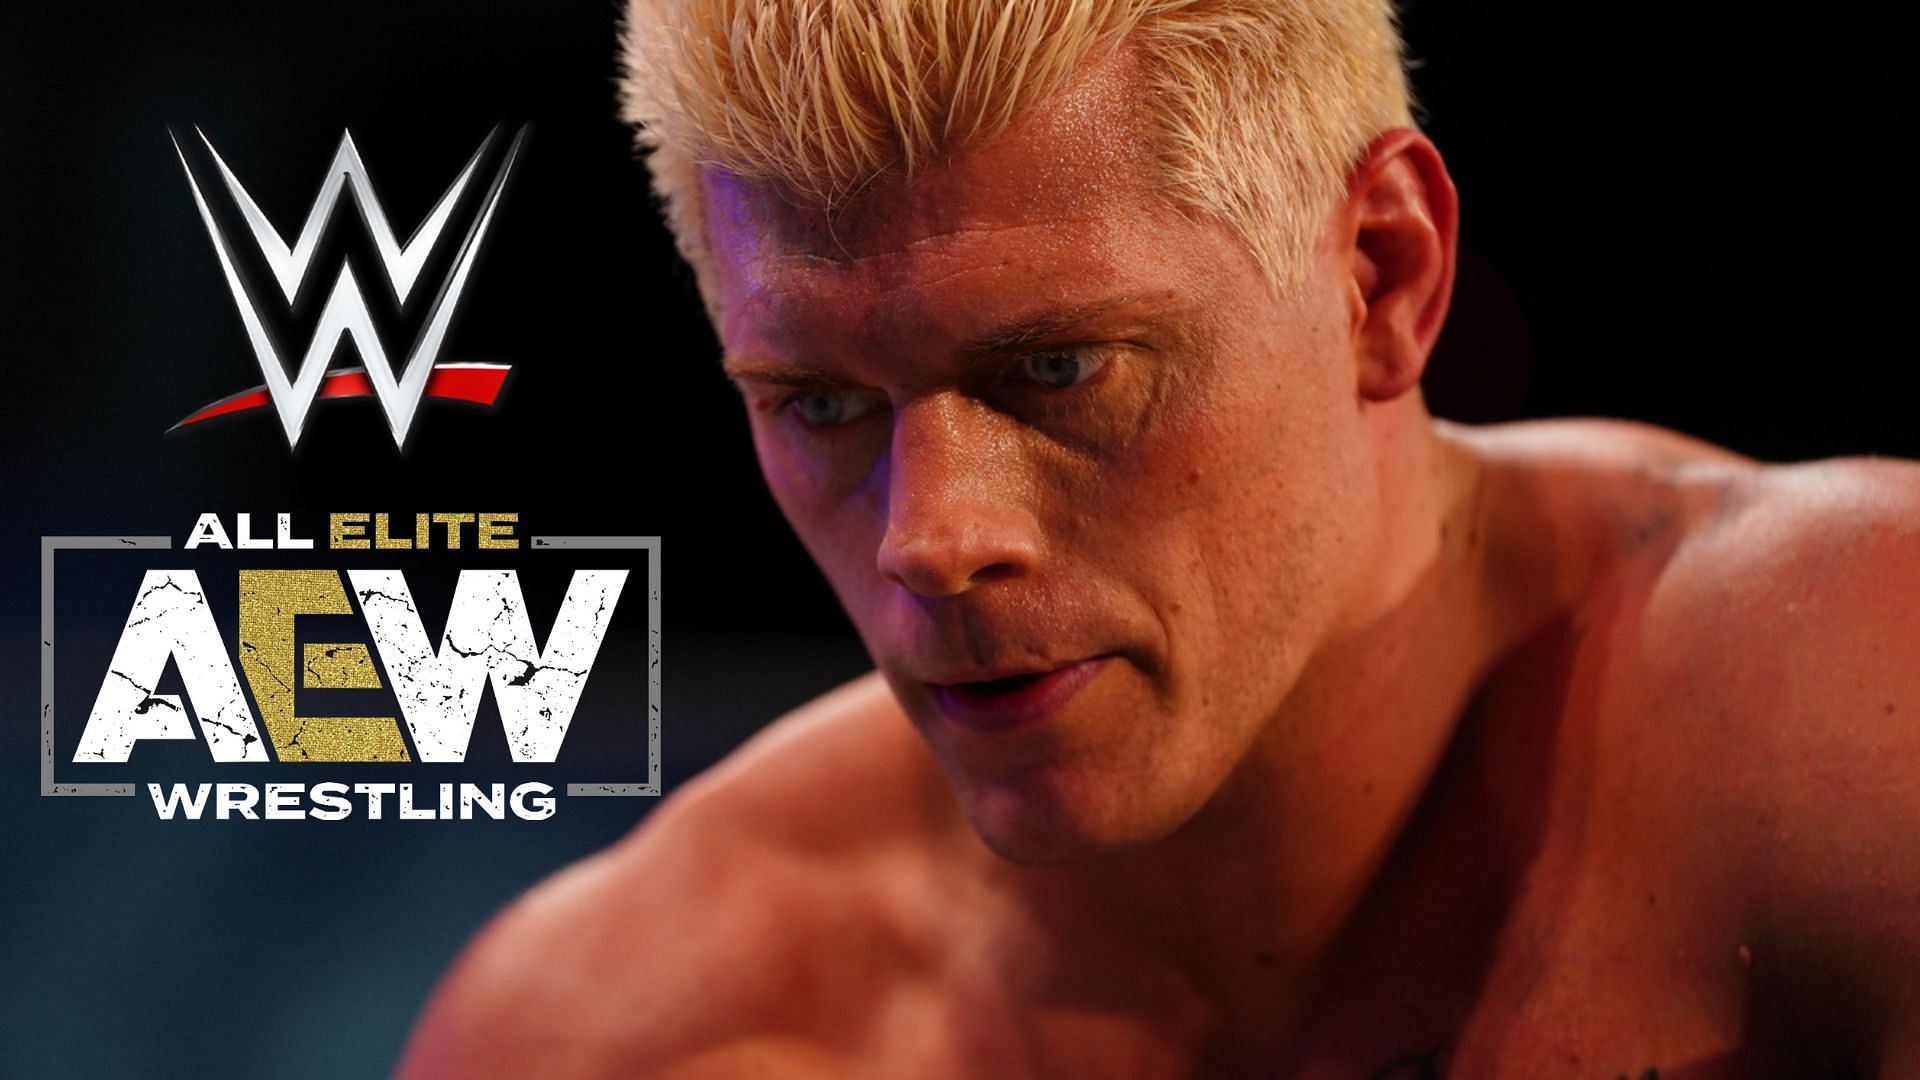 Cody Rhodes is currently in WWE